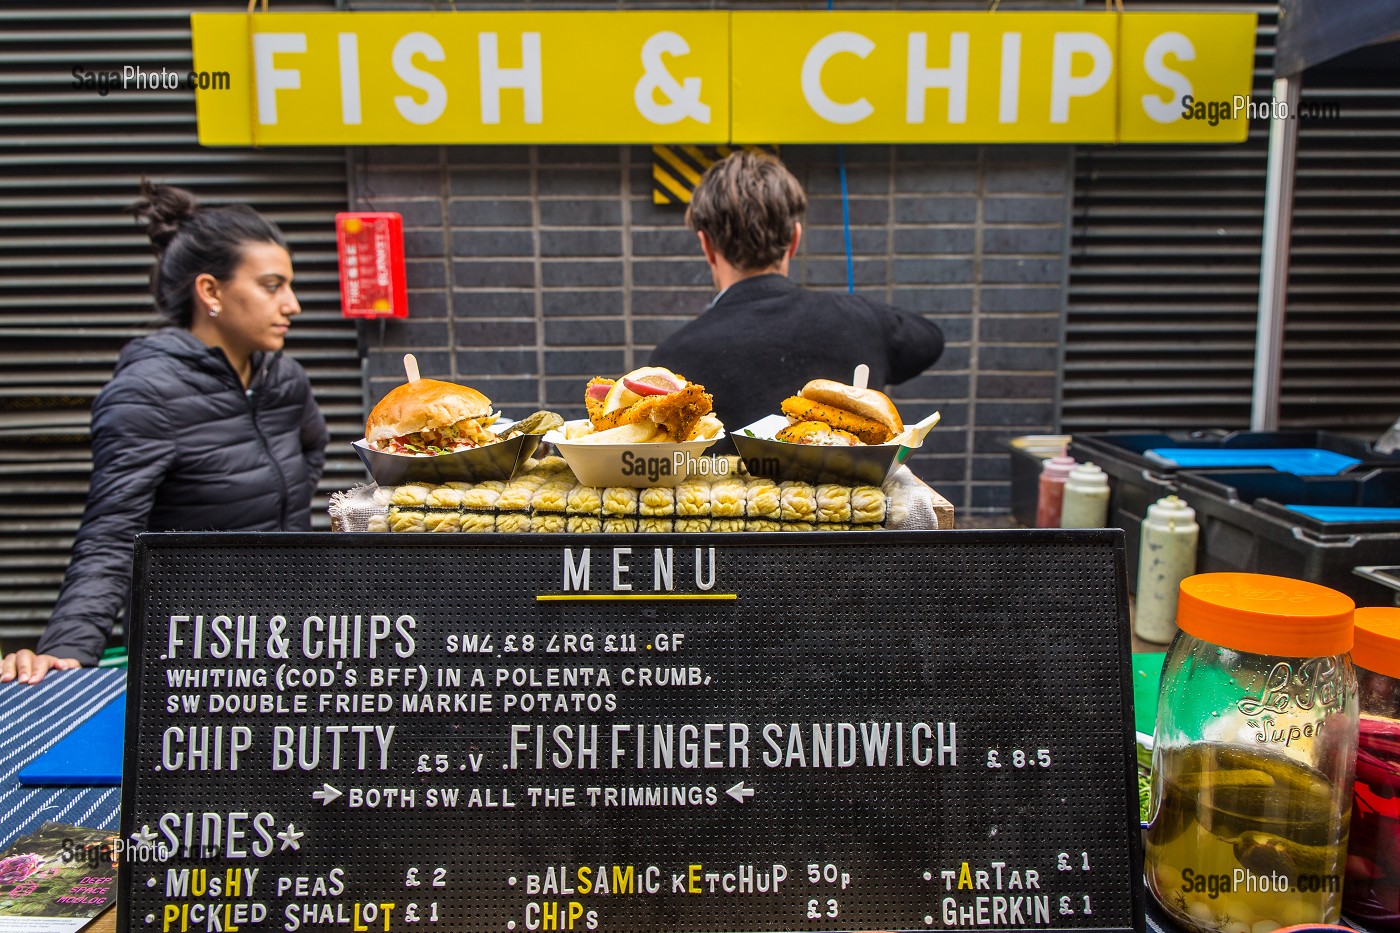 ILLUSTRATION FISH AND CHIPS, LONDRES, ANGLETERRE 